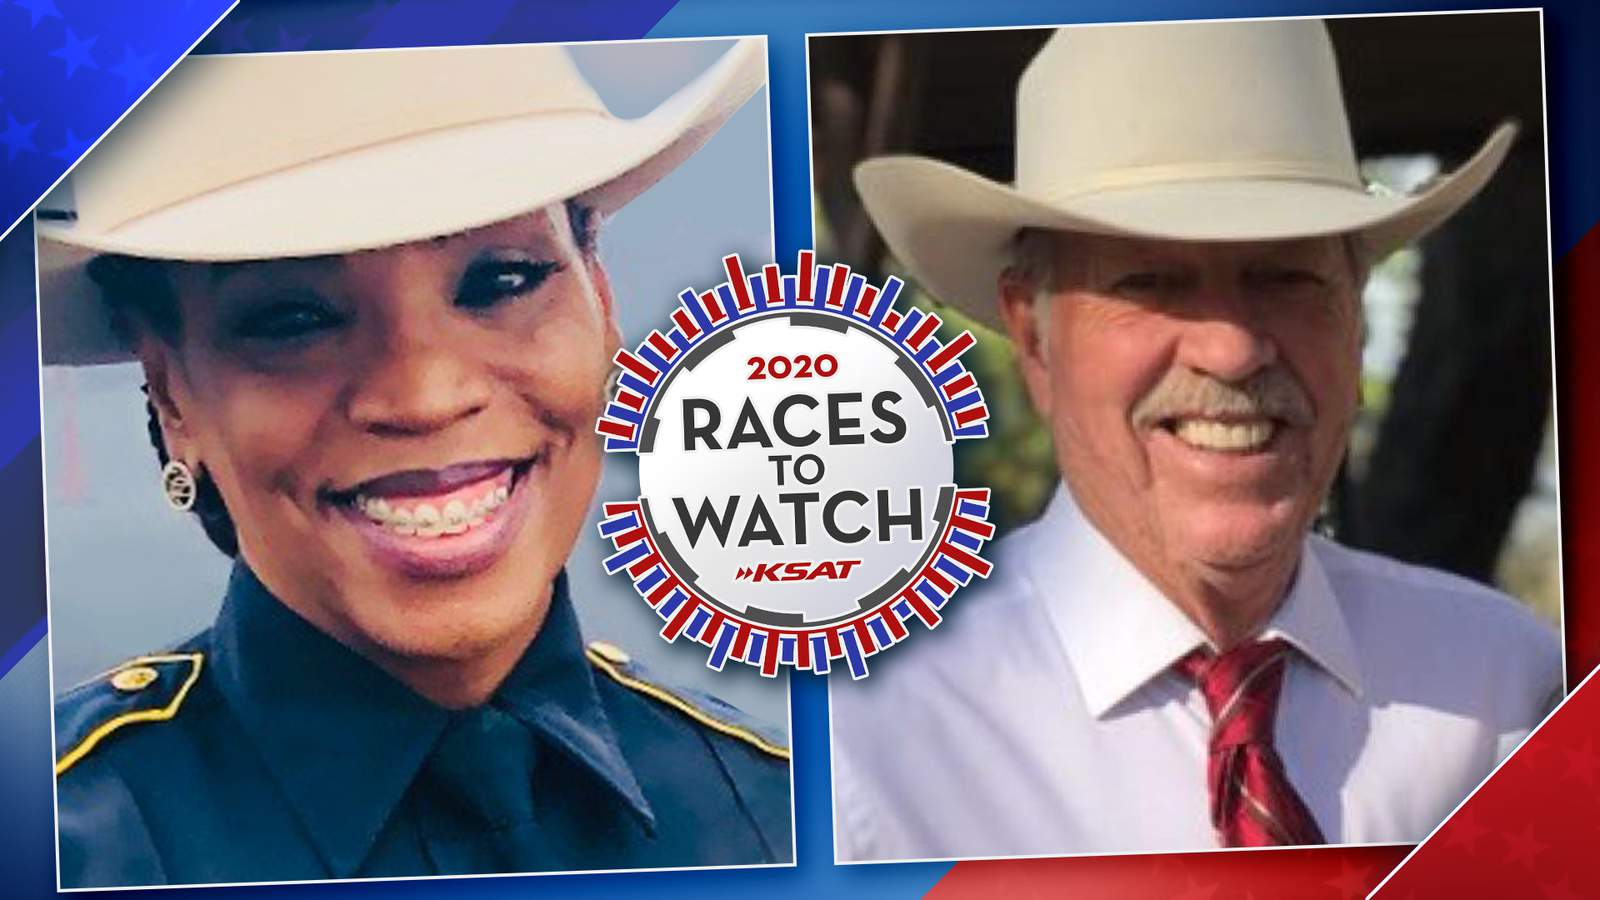 Kathryn Brown vying to be first Black woman Bexar County constable in race against Larry Ricketts in Precinct 4